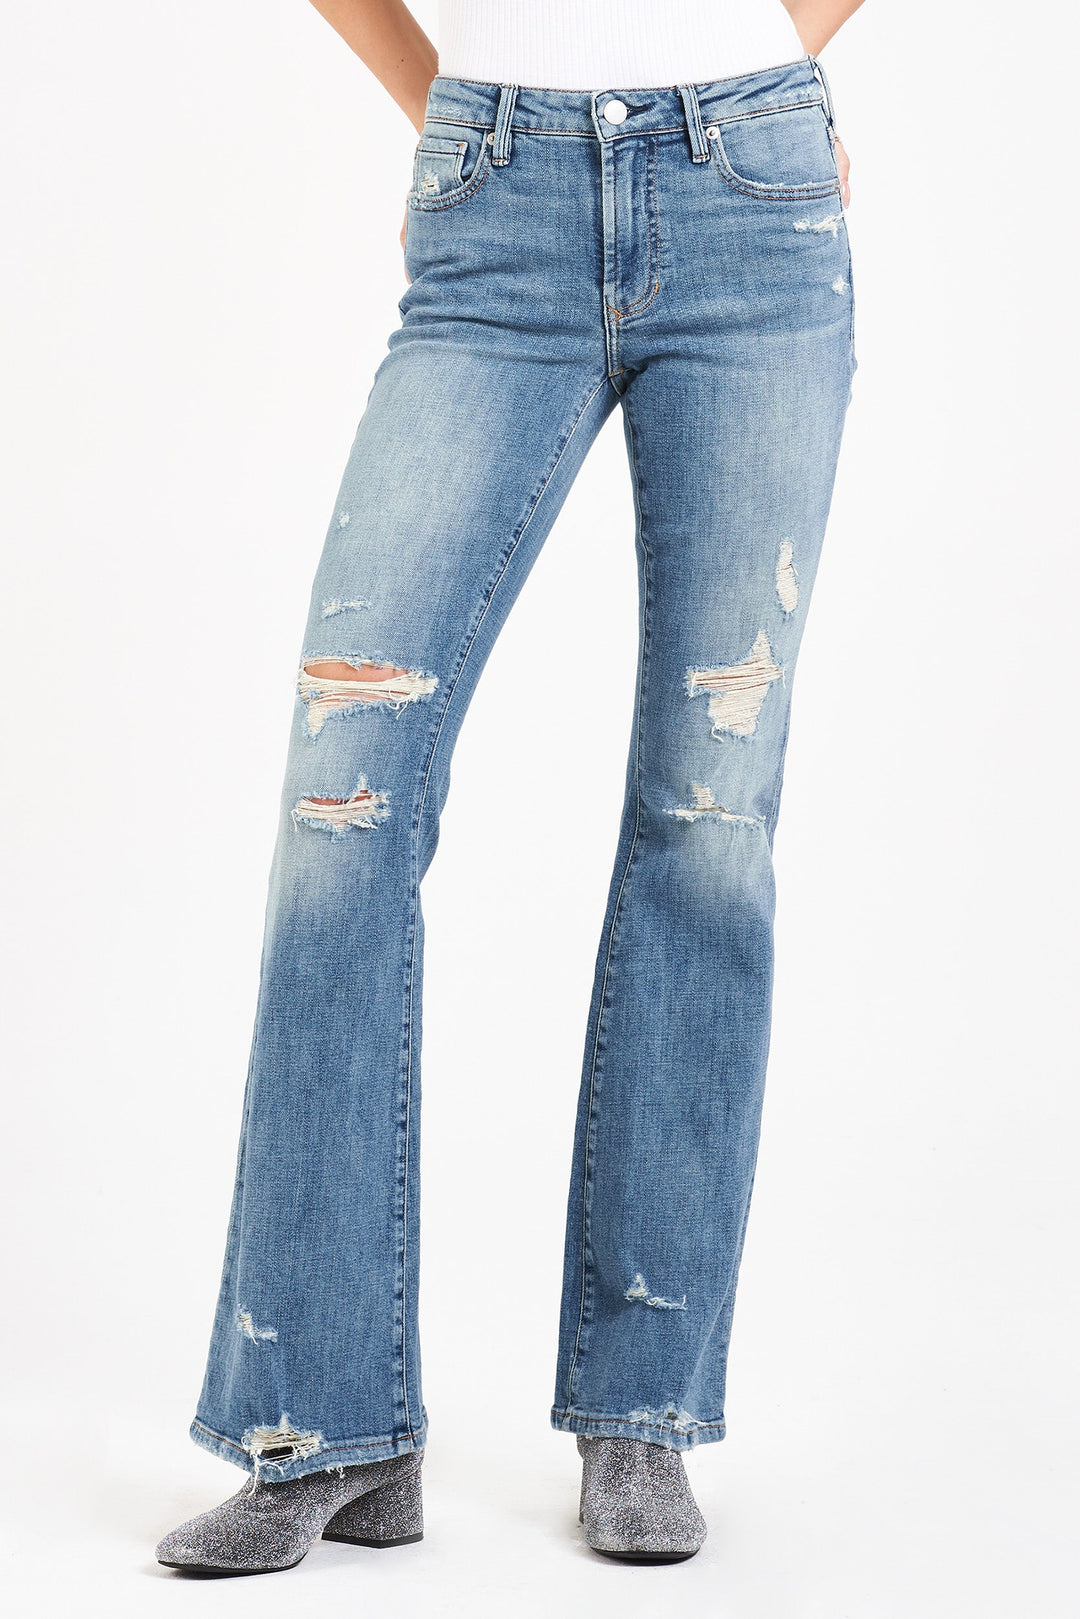 image of a female model wearing a ROSA HIGH RISE FLARE LEG JEANS ELM GROVE JEANS